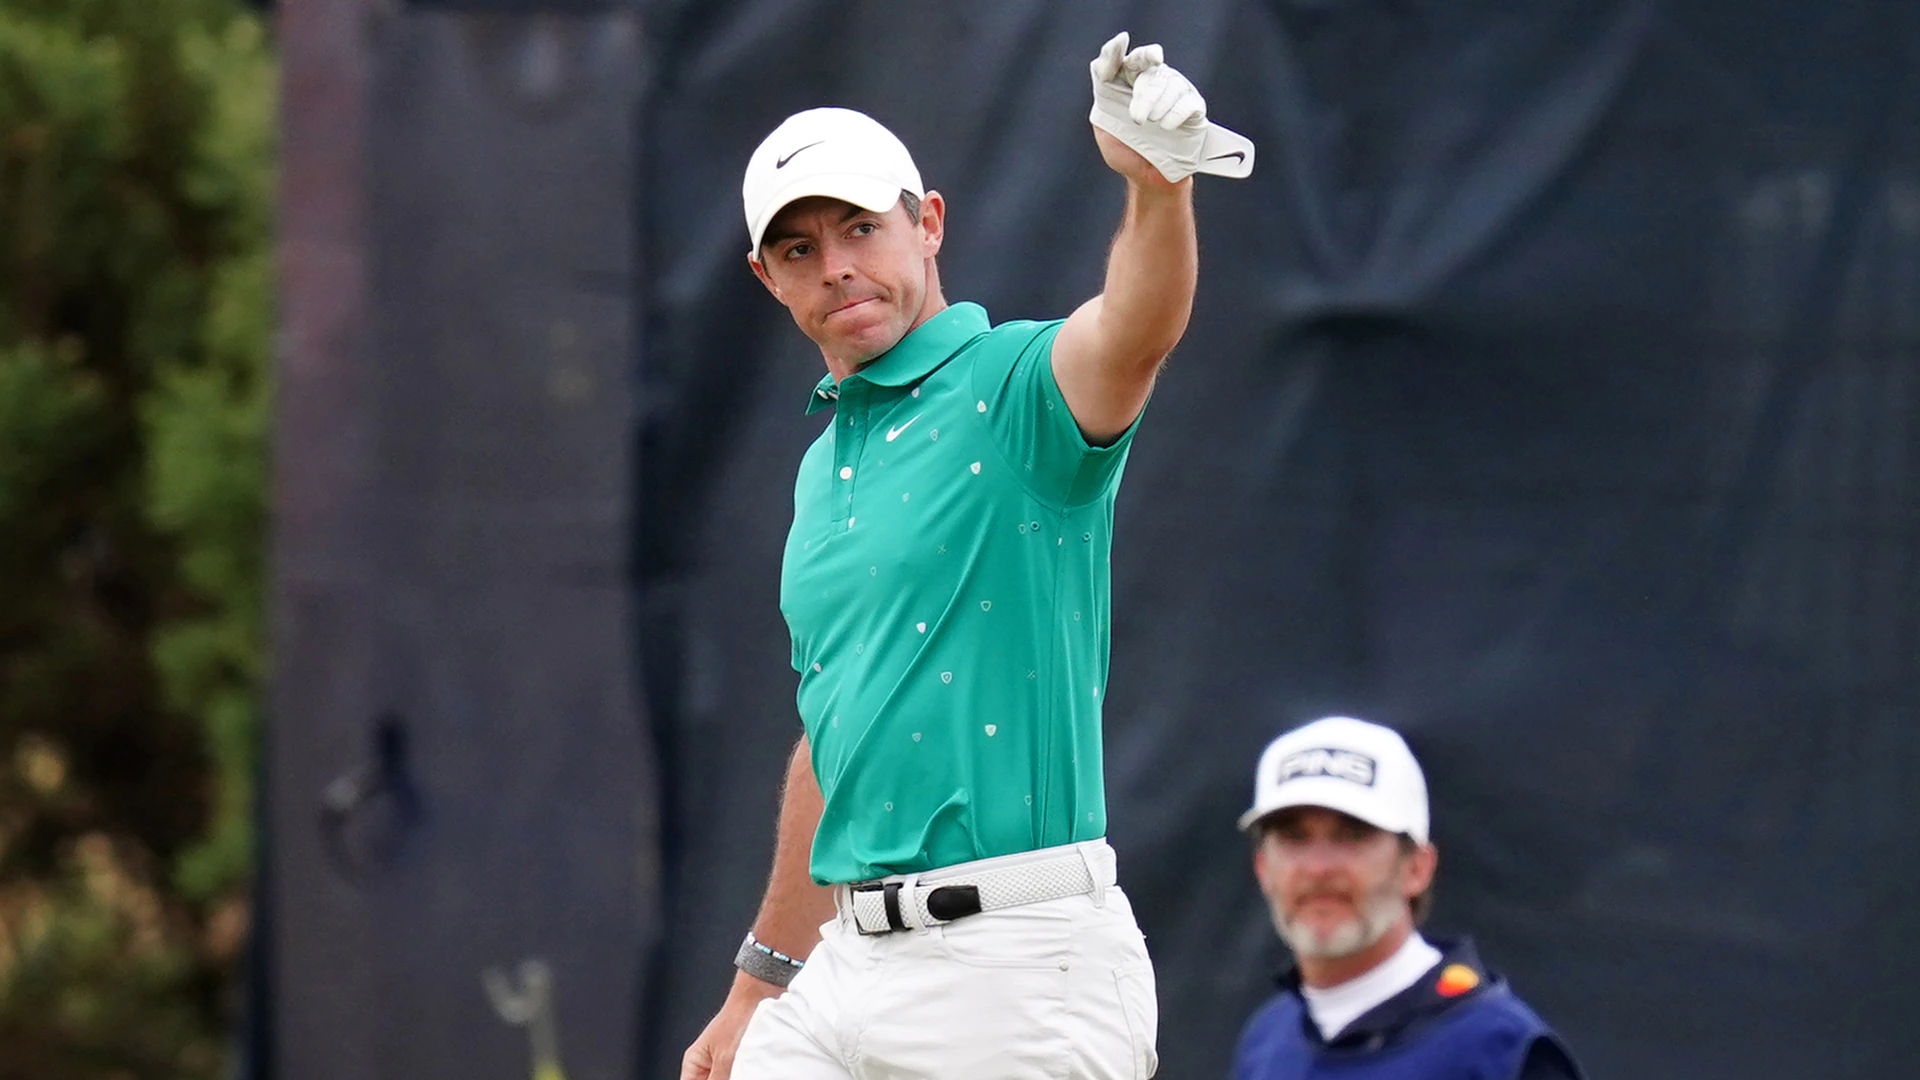 2022 British Open: By staying in cocoon, Rory McIlroy hopes to blossom into major champ once again